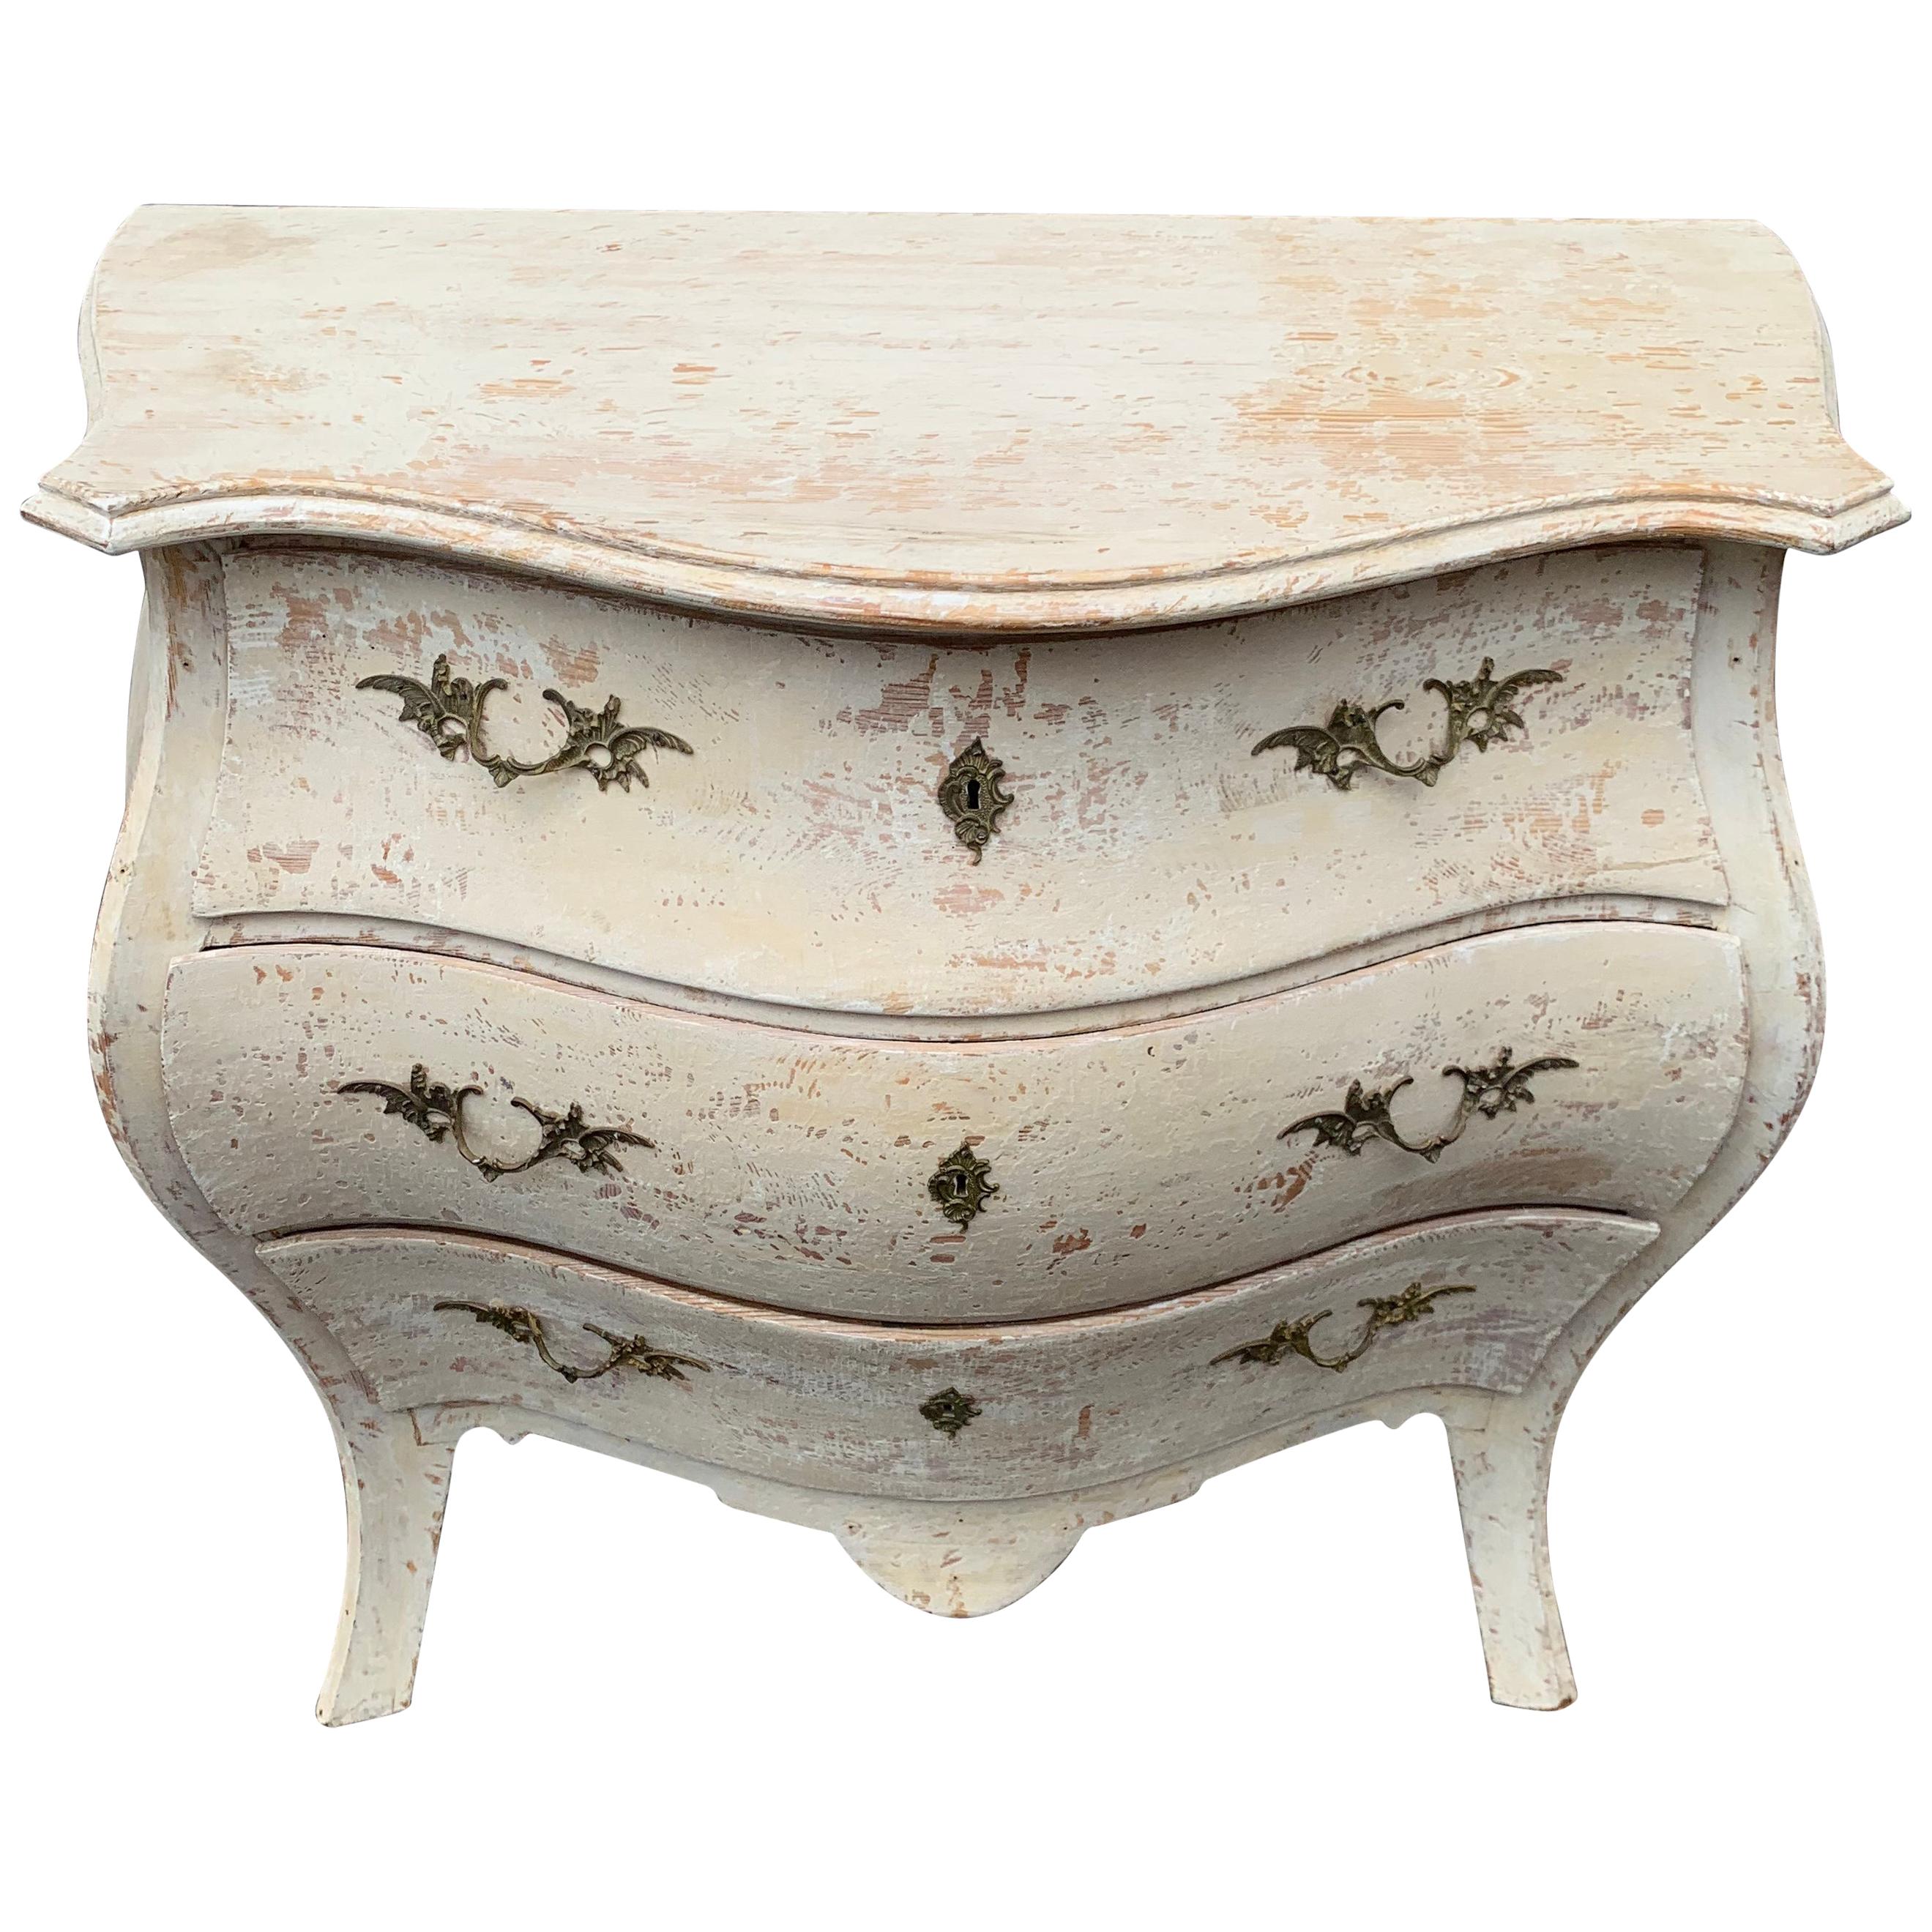 19th Century Gustavian Painted Bombè Chest of Drawers, Sweden